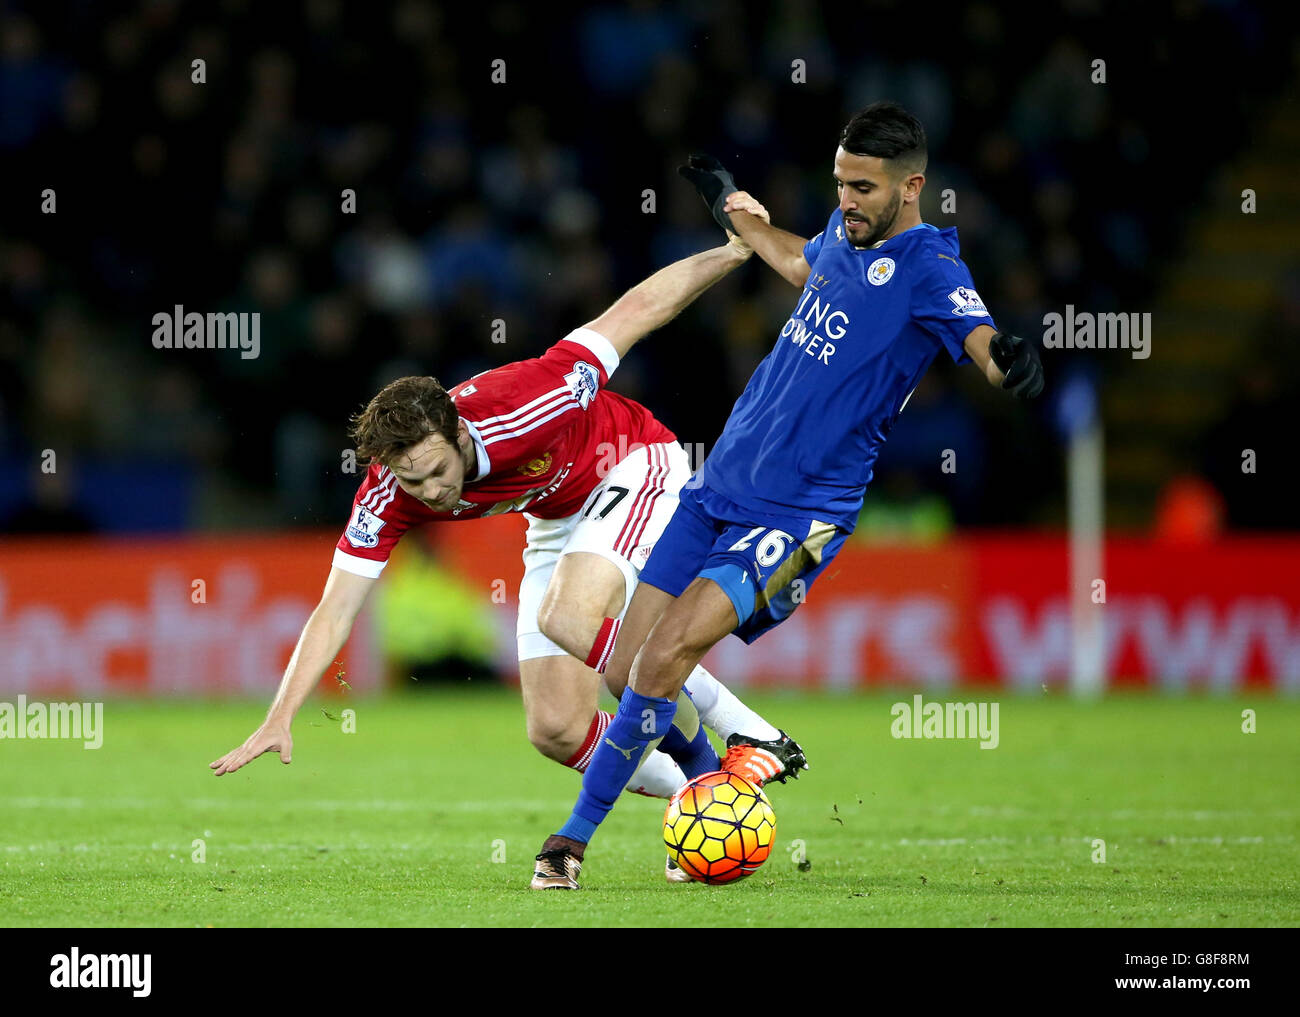 Manchester United's Daley Blind (left) and Leicester City's Riyad Mahrez battle for the ball during the Barclays Premier League match at the King Power Stadium, Leicester. Stock Photo